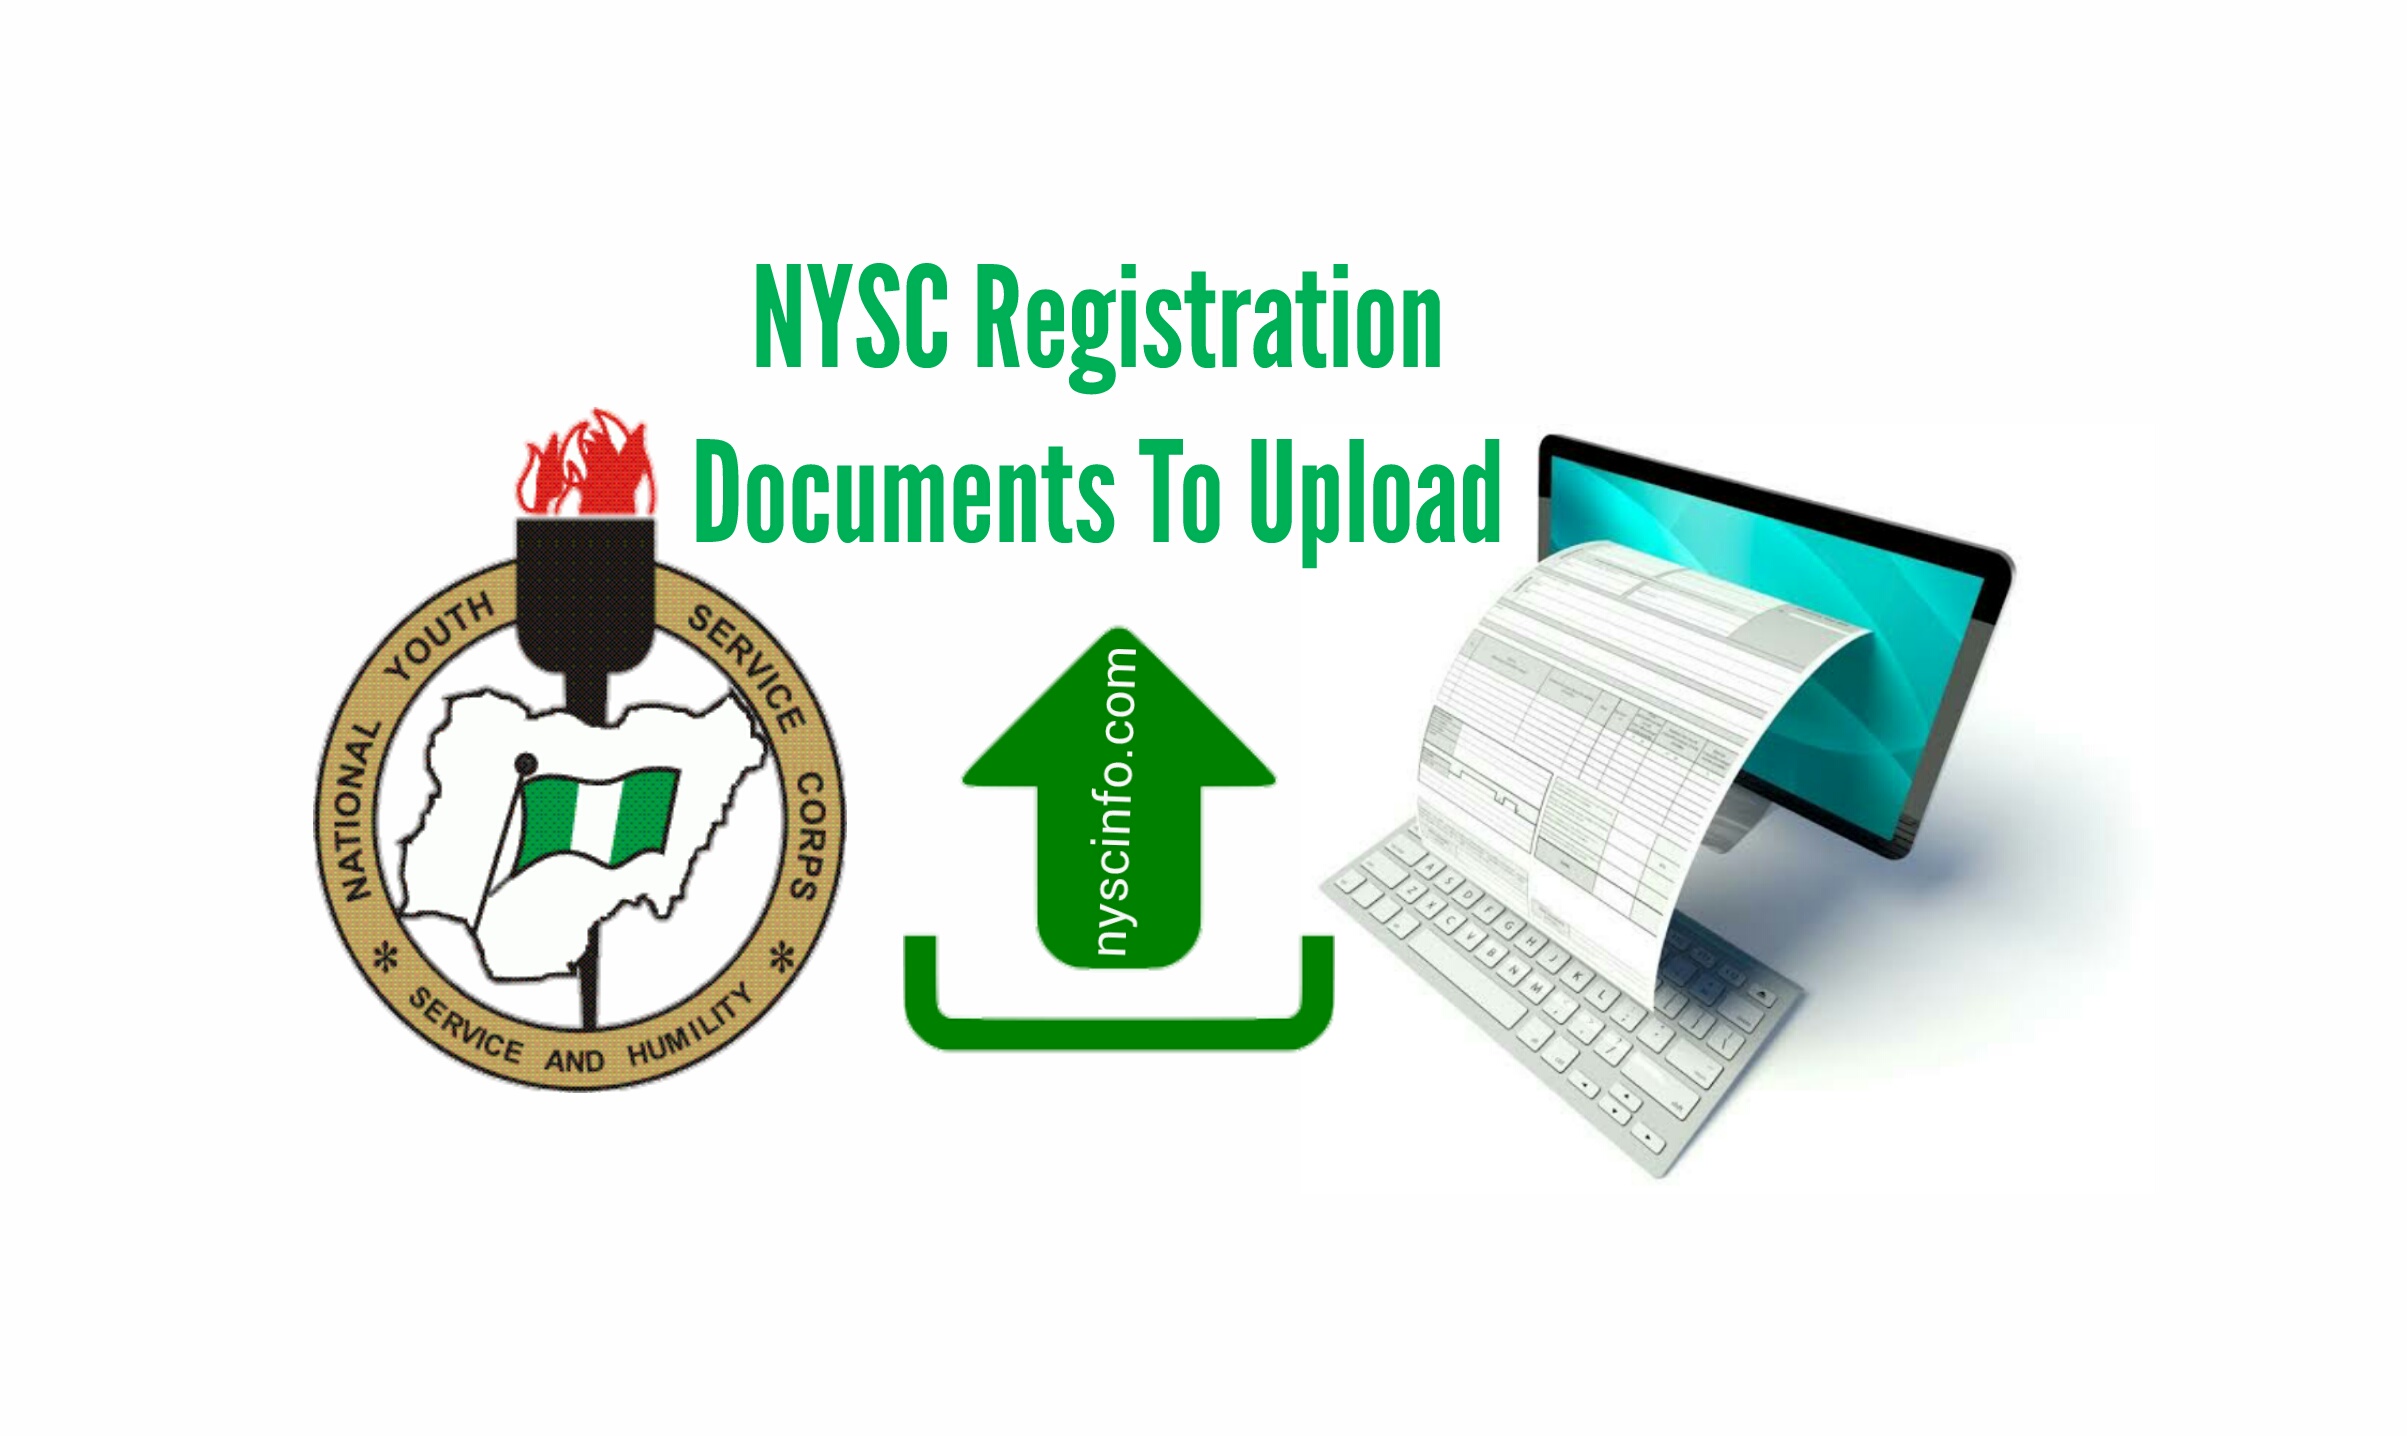 Documents Needed For NYSC Registration